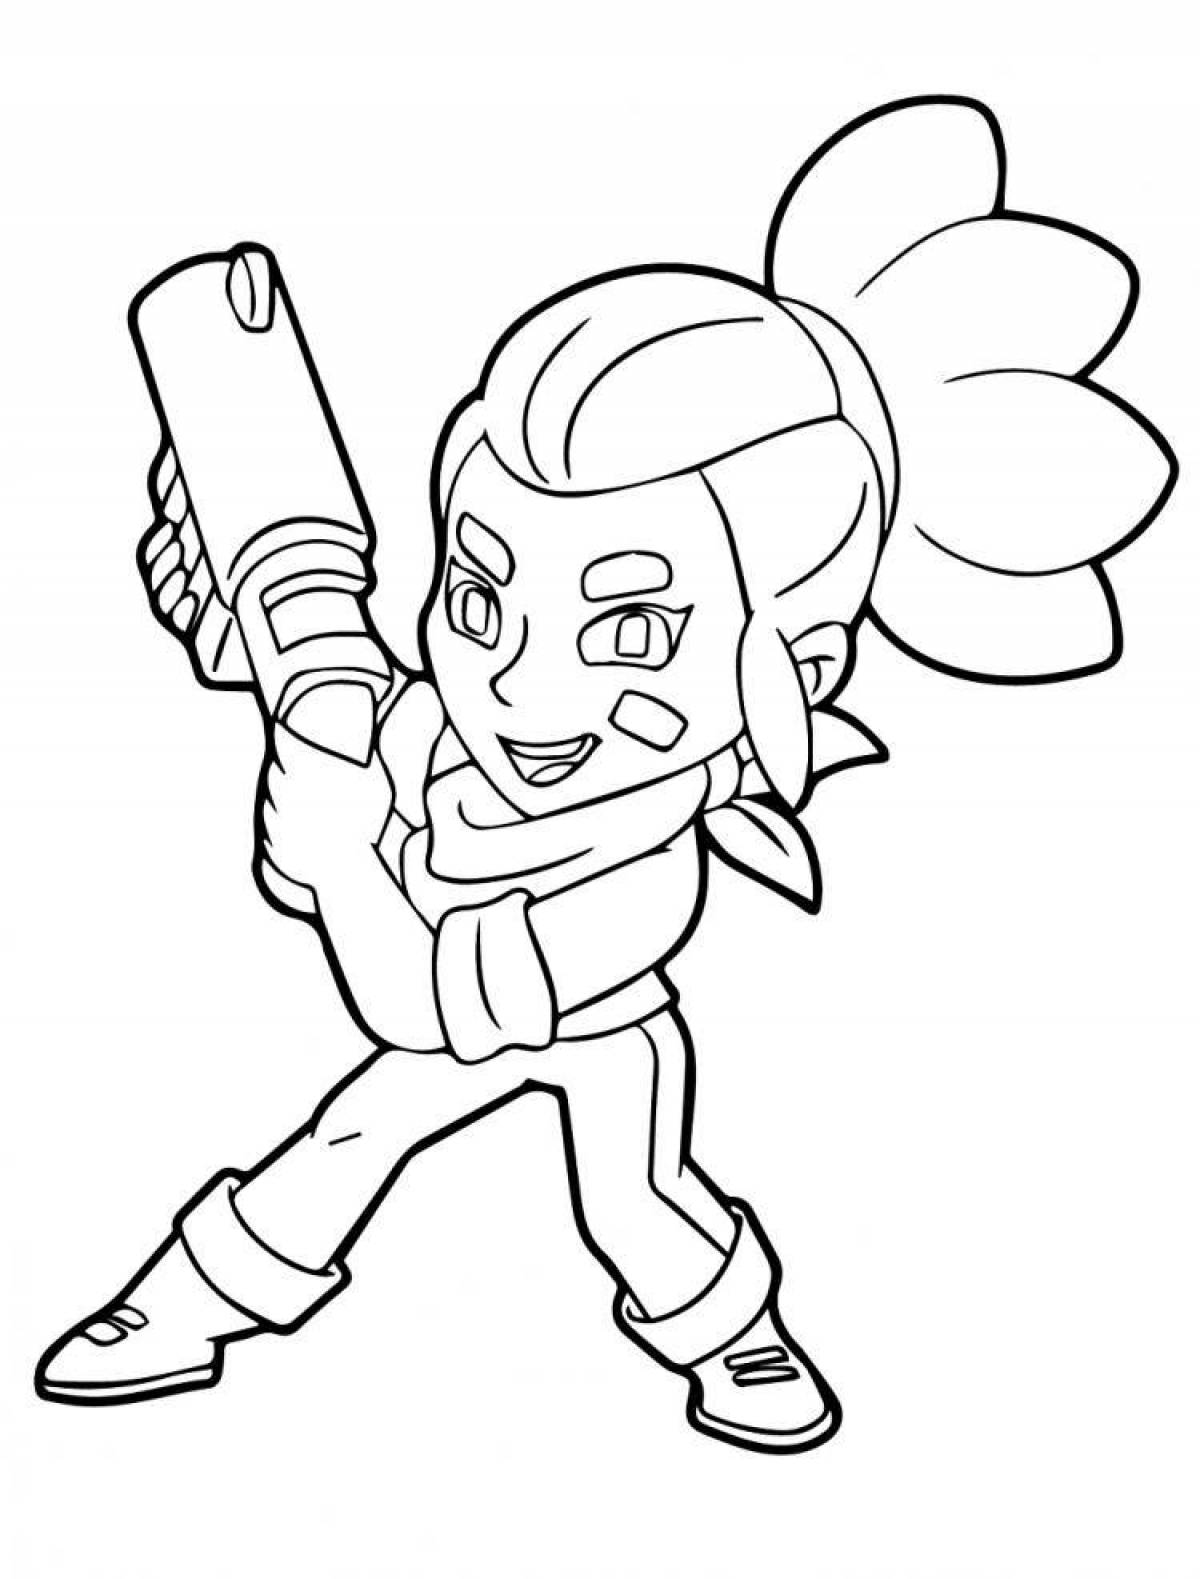 Charming shelly coloring page